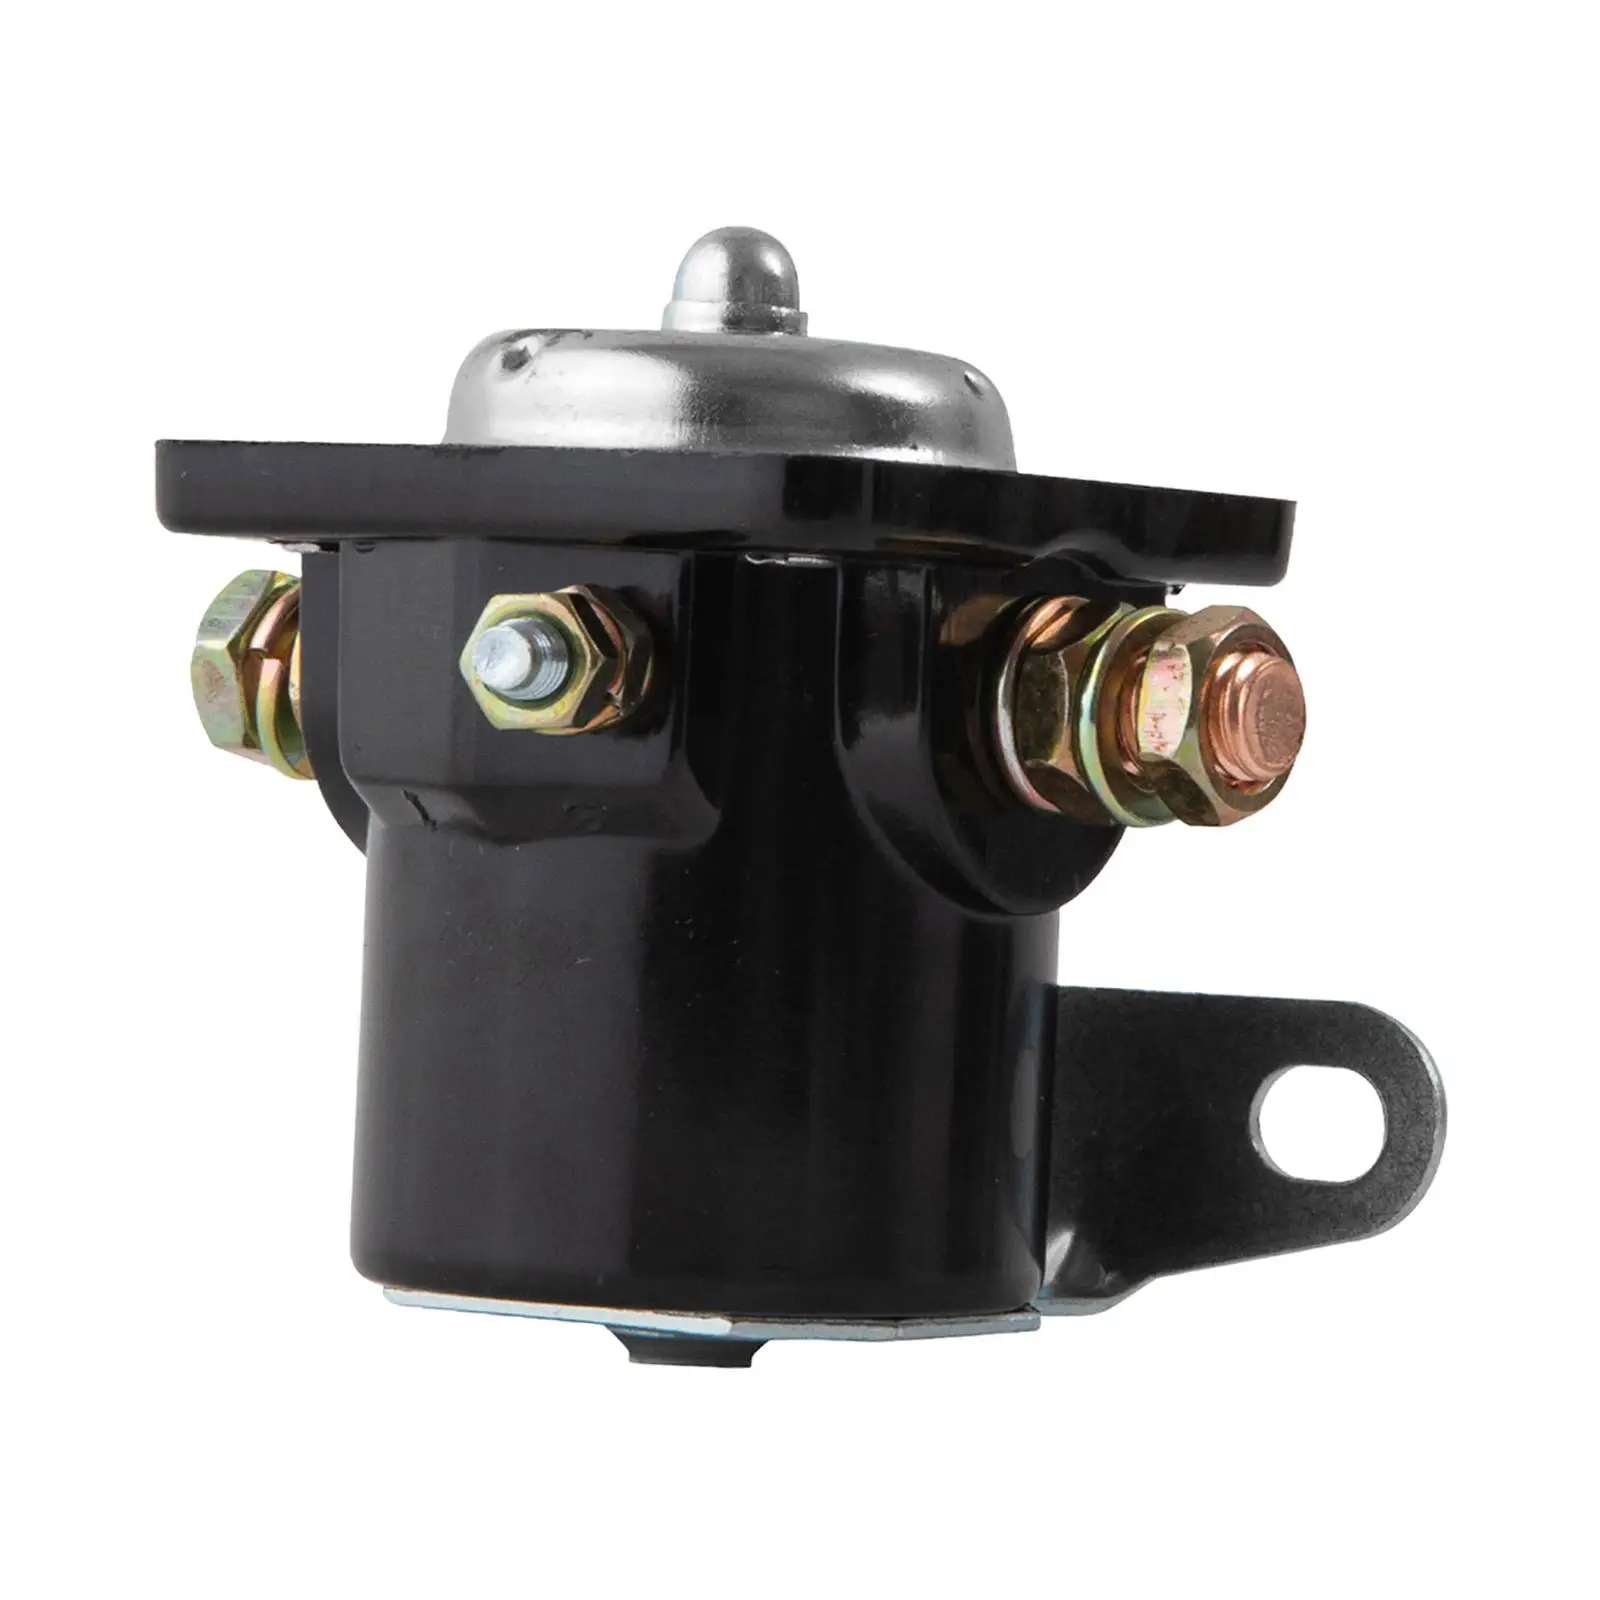 Starter Solenoid Switch Relay Accessory for Teledyne-continental Sturdy